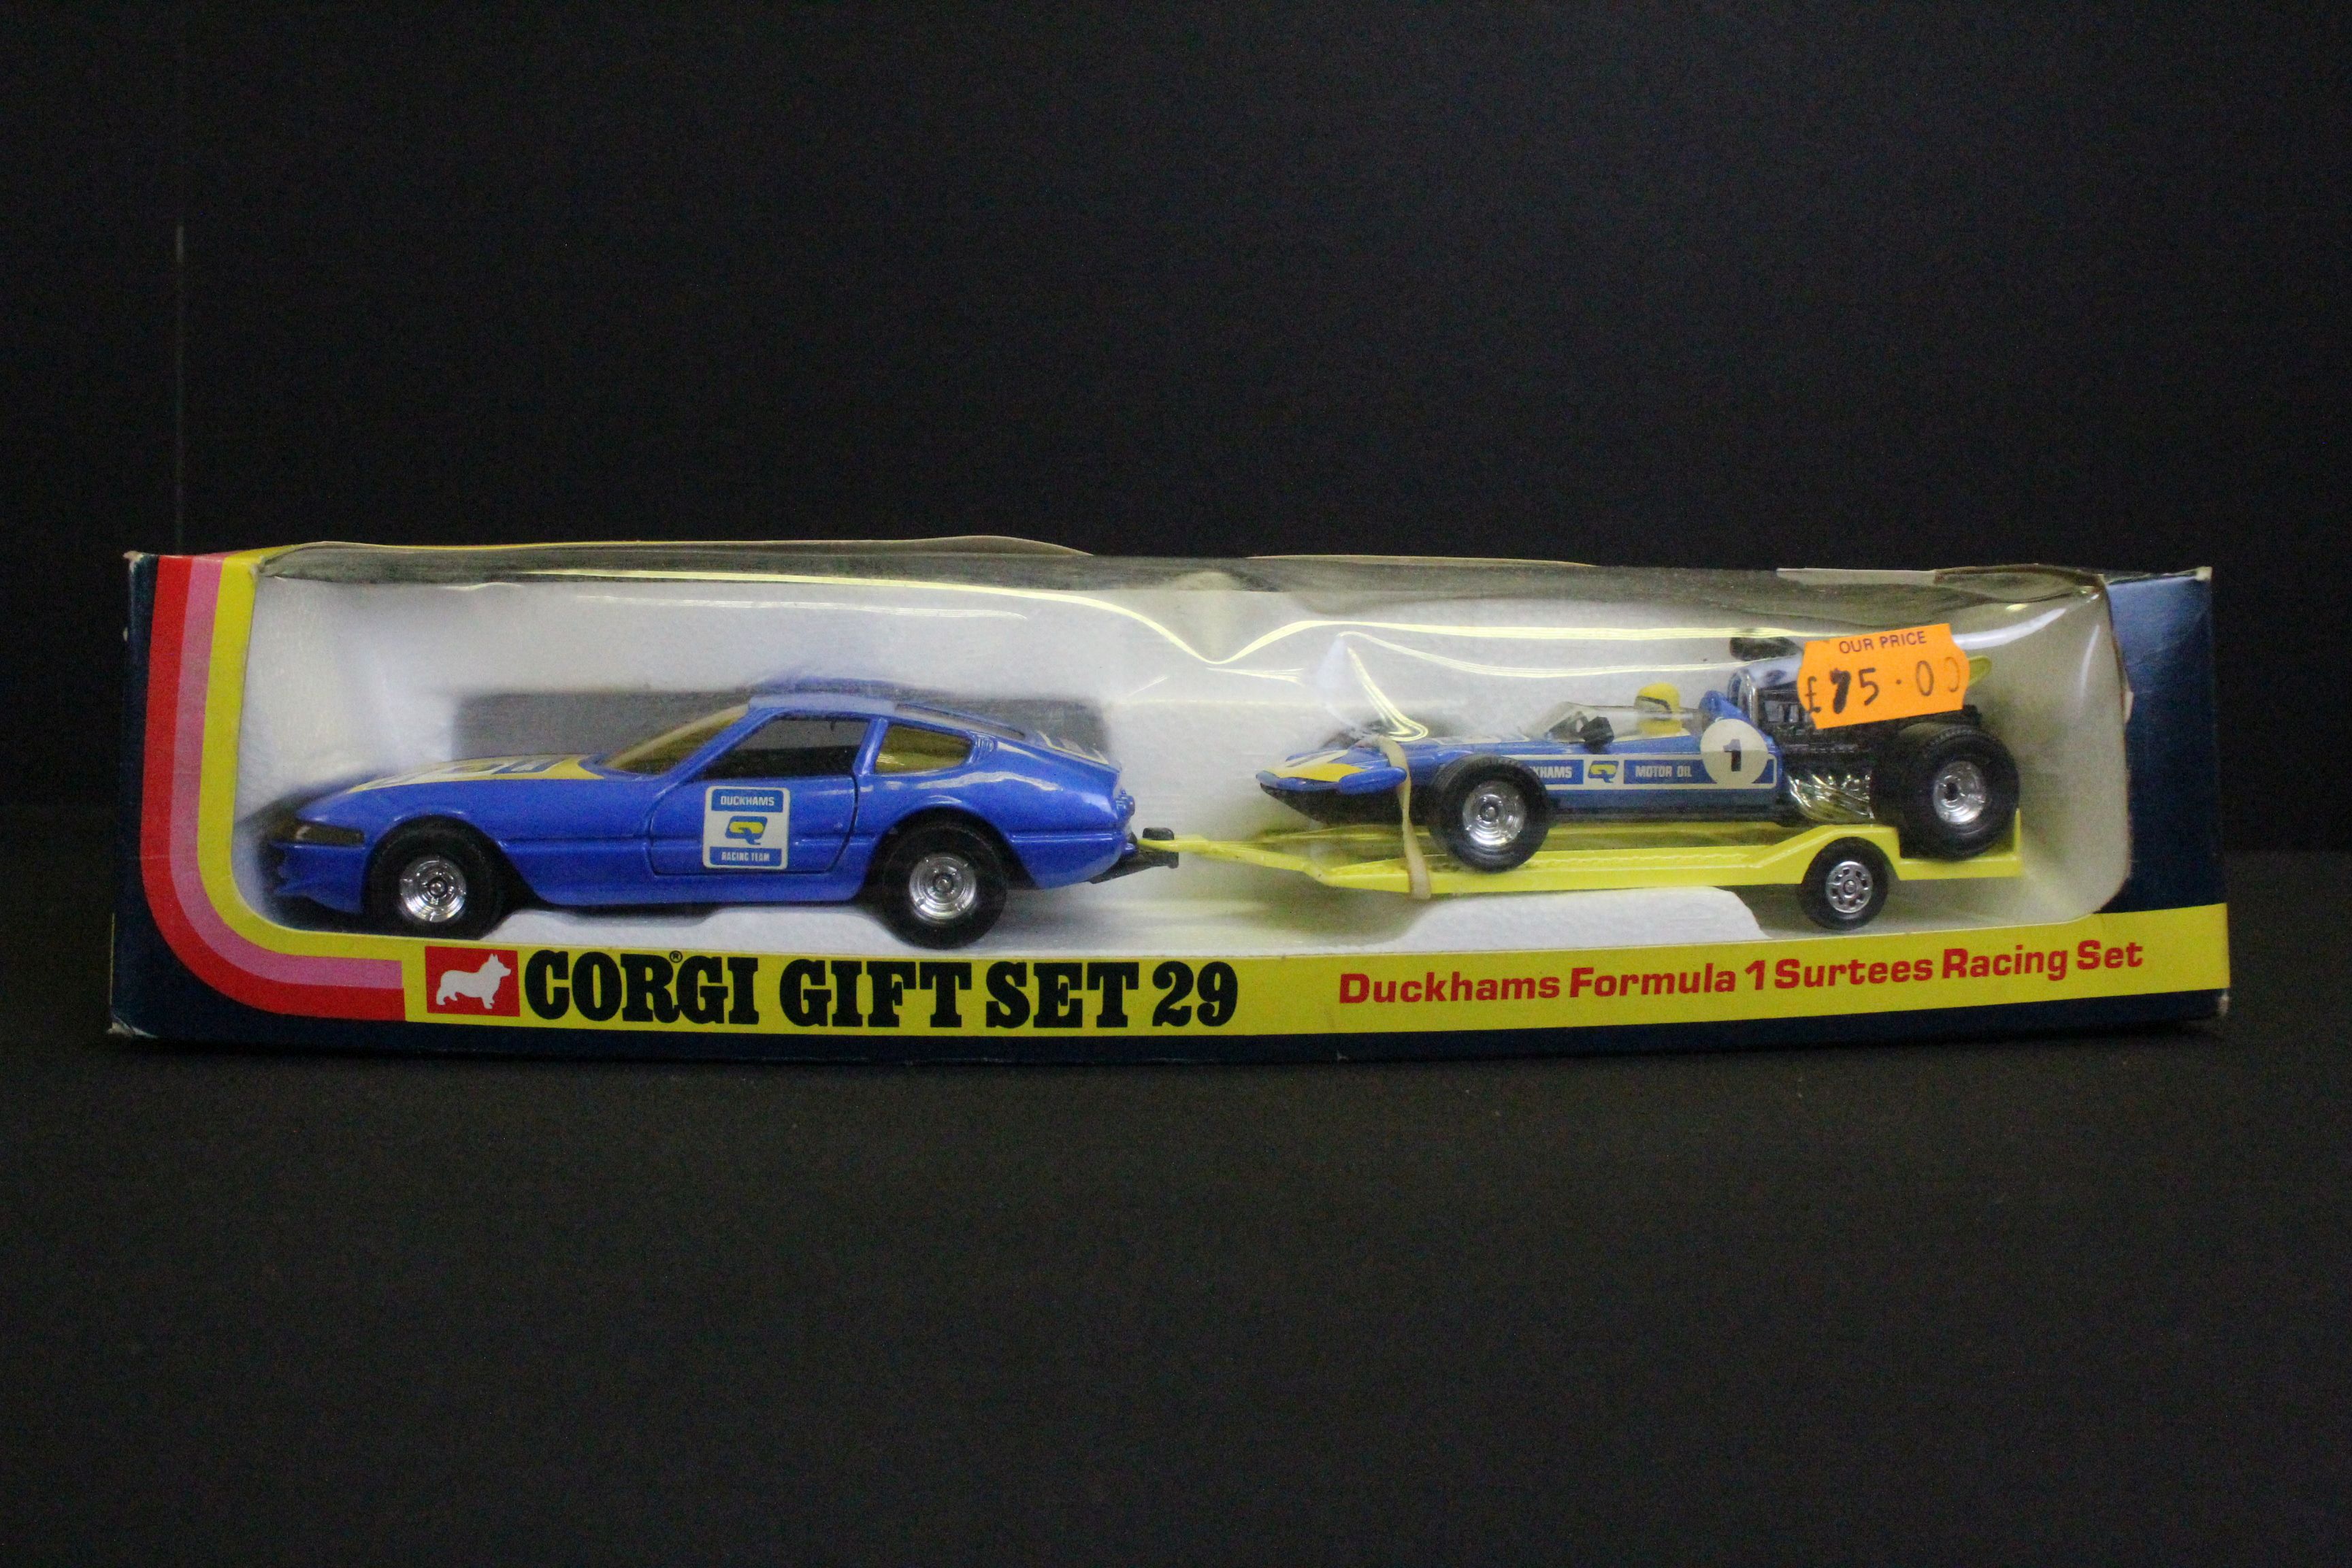 Five boxed Corgi Gift Sets / multi diecast sets to include GS29 Duckhams Formula 1 Surtees Racing - Image 4 of 6